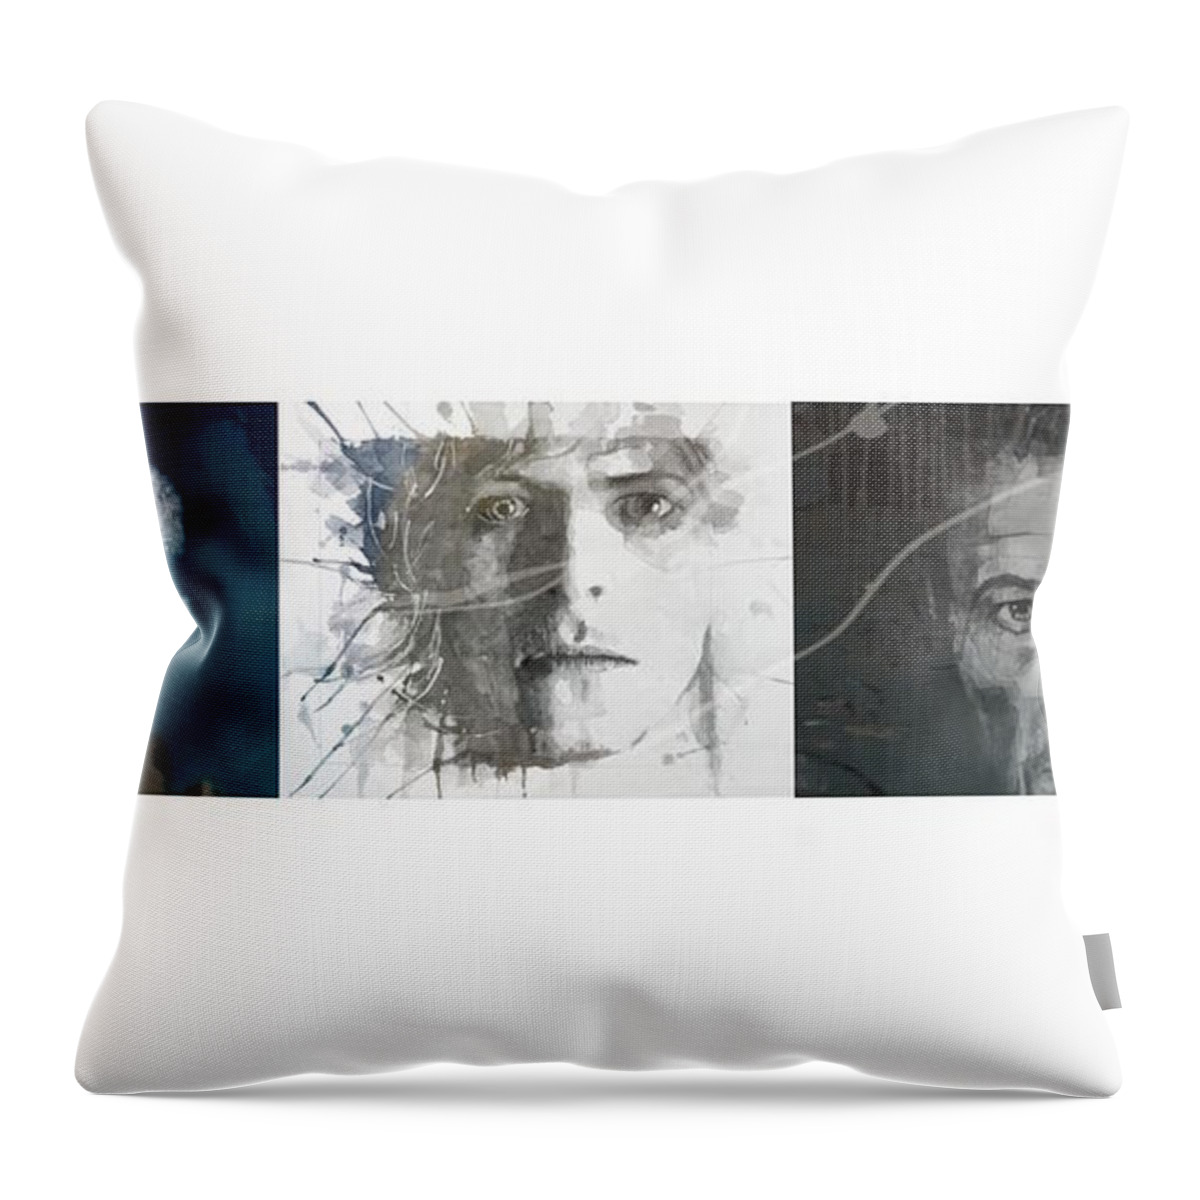 David Bowie Throw Pillow featuring the mixed media Changes David Bowie Triptych by Paul Lovering